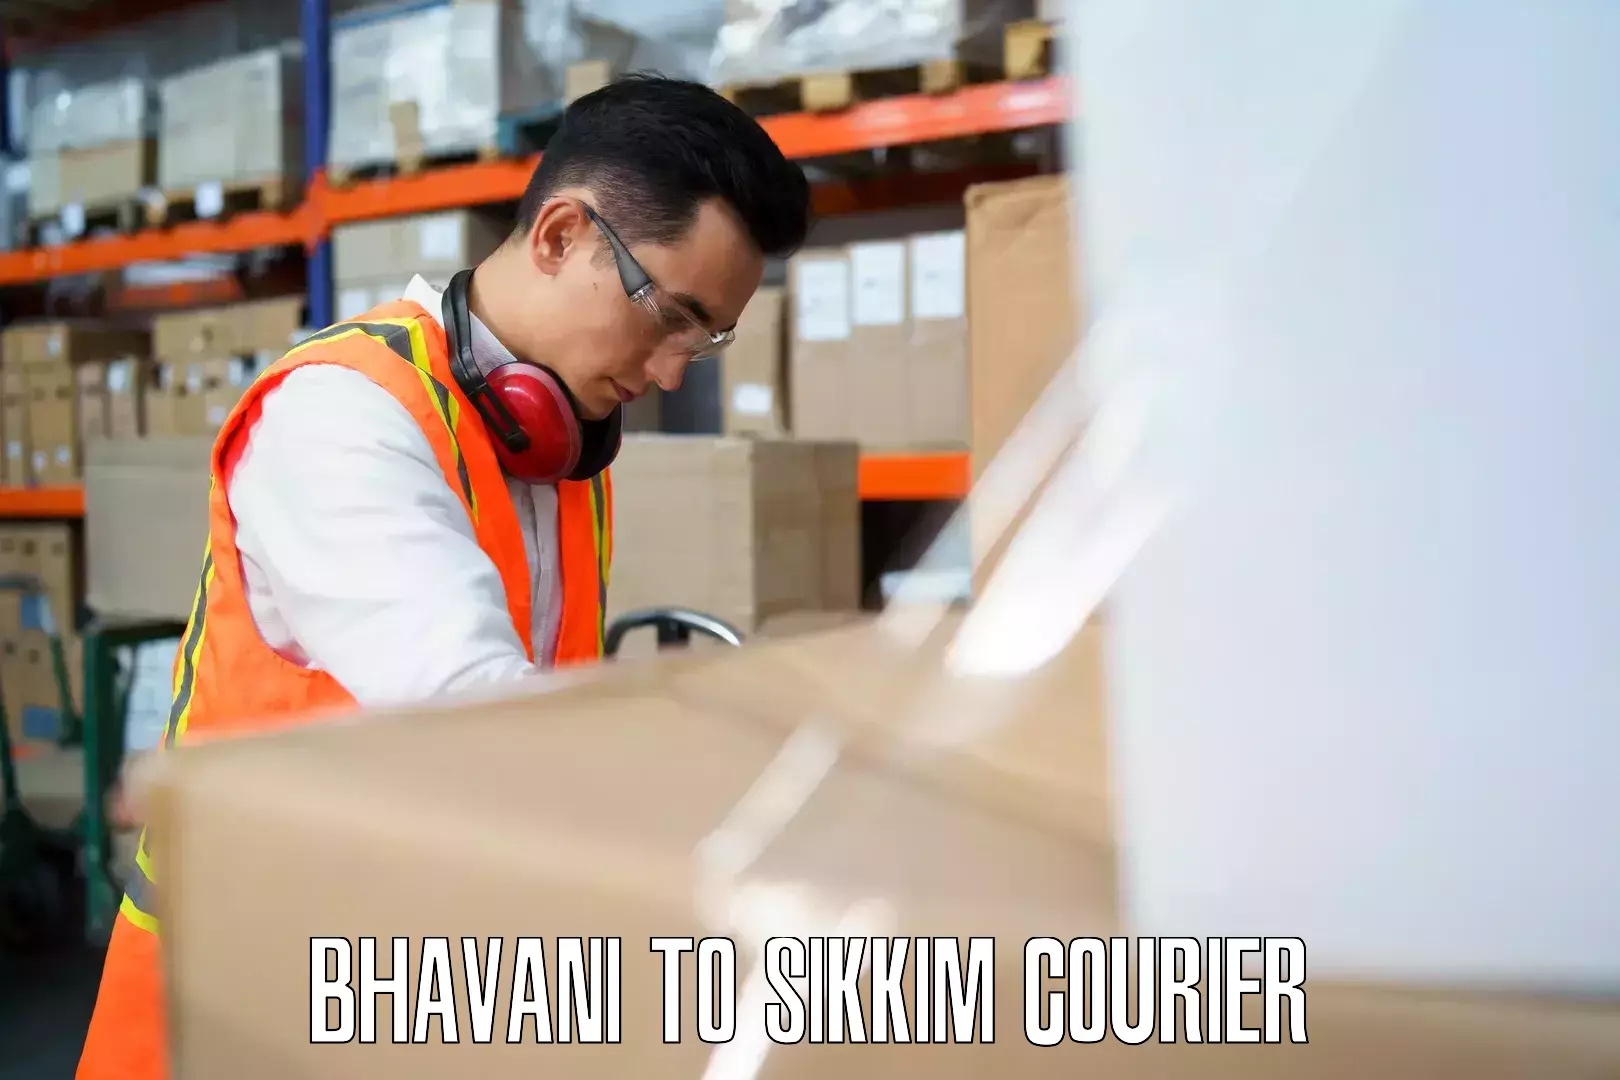 Luggage shipment specialists Bhavani to Pelling